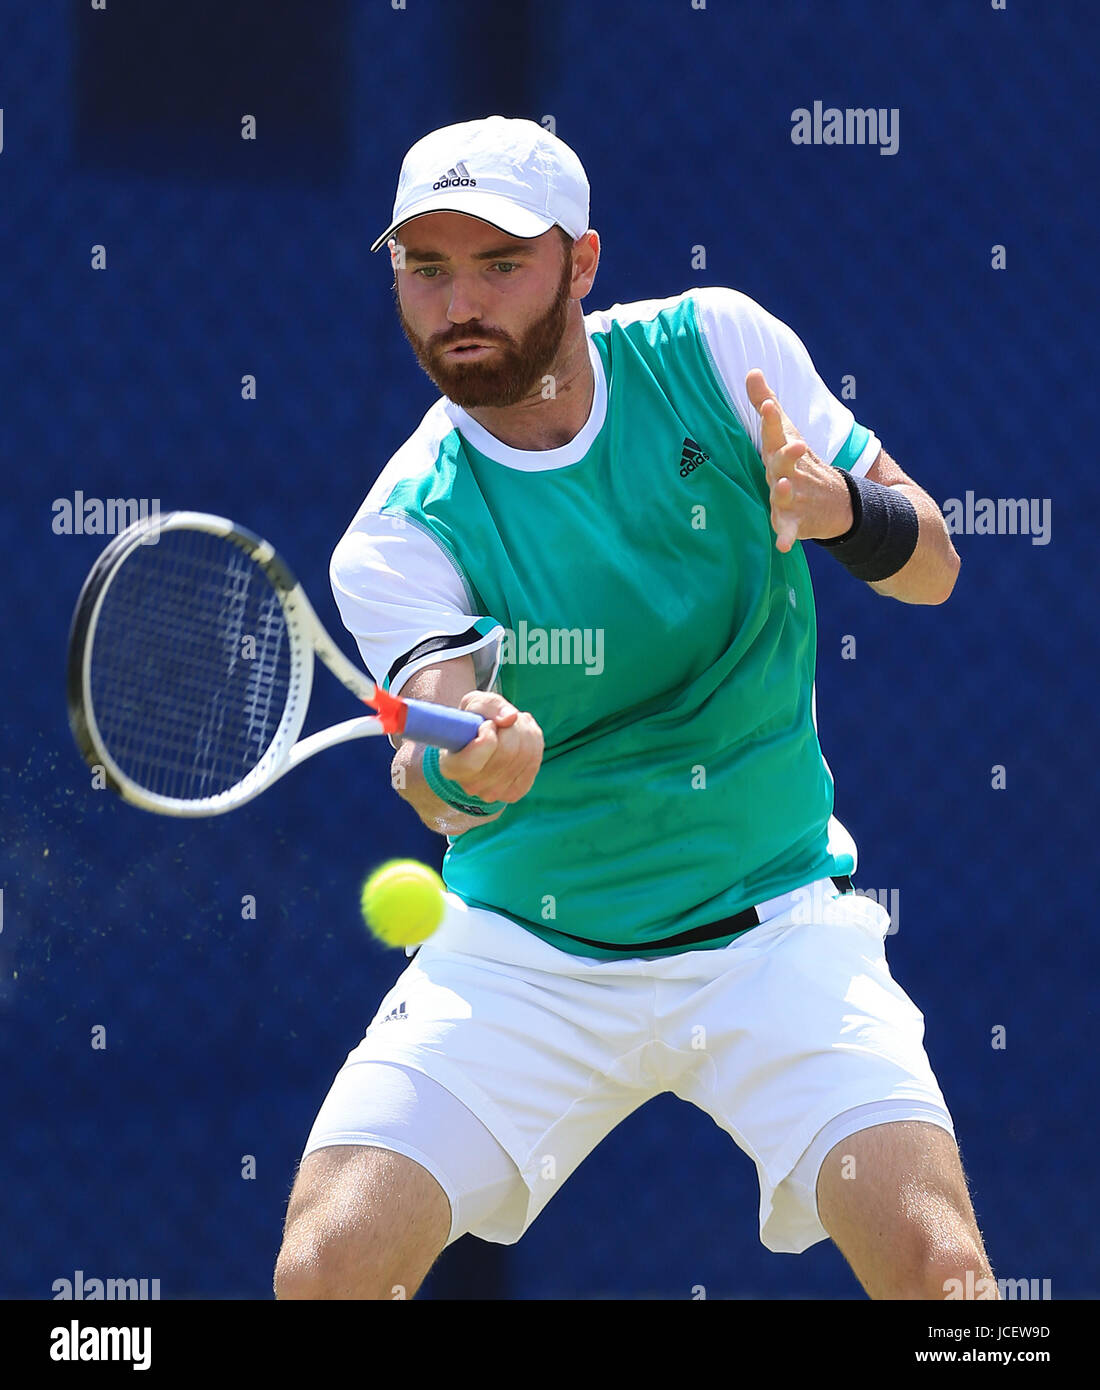 USA's Bjorn Fratangelo during day four of the AEGON Open Nottingham at  Nottingham Tennis Centre. PRESS ASSOCIATION Photo. Picture date: Thursday  June 15, 2017. See PA story TENNIS Nottingham. Photo credit should